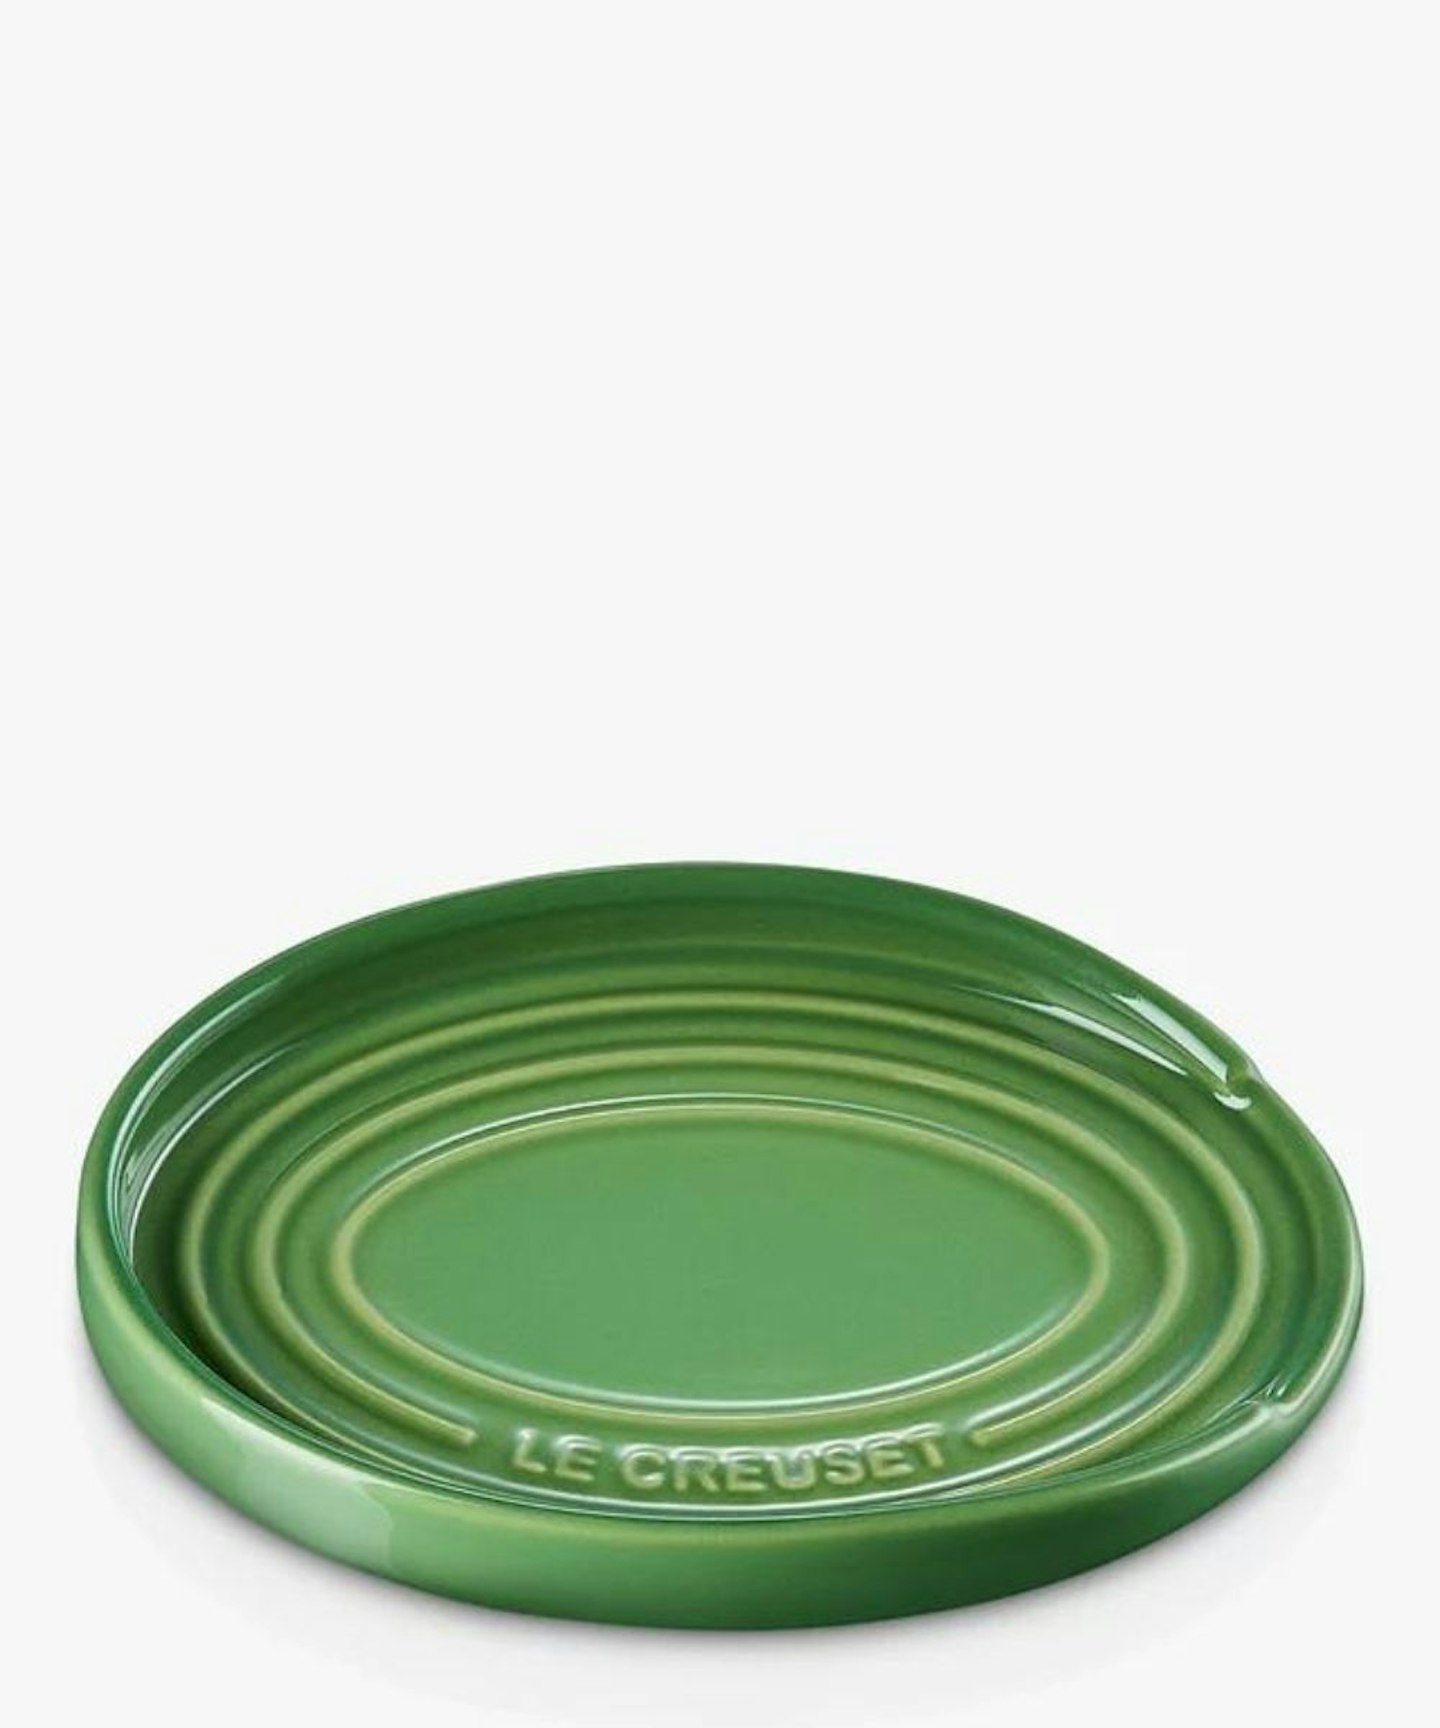 Le Creuset Oval Stoneware Spoon Rest, Bamboo